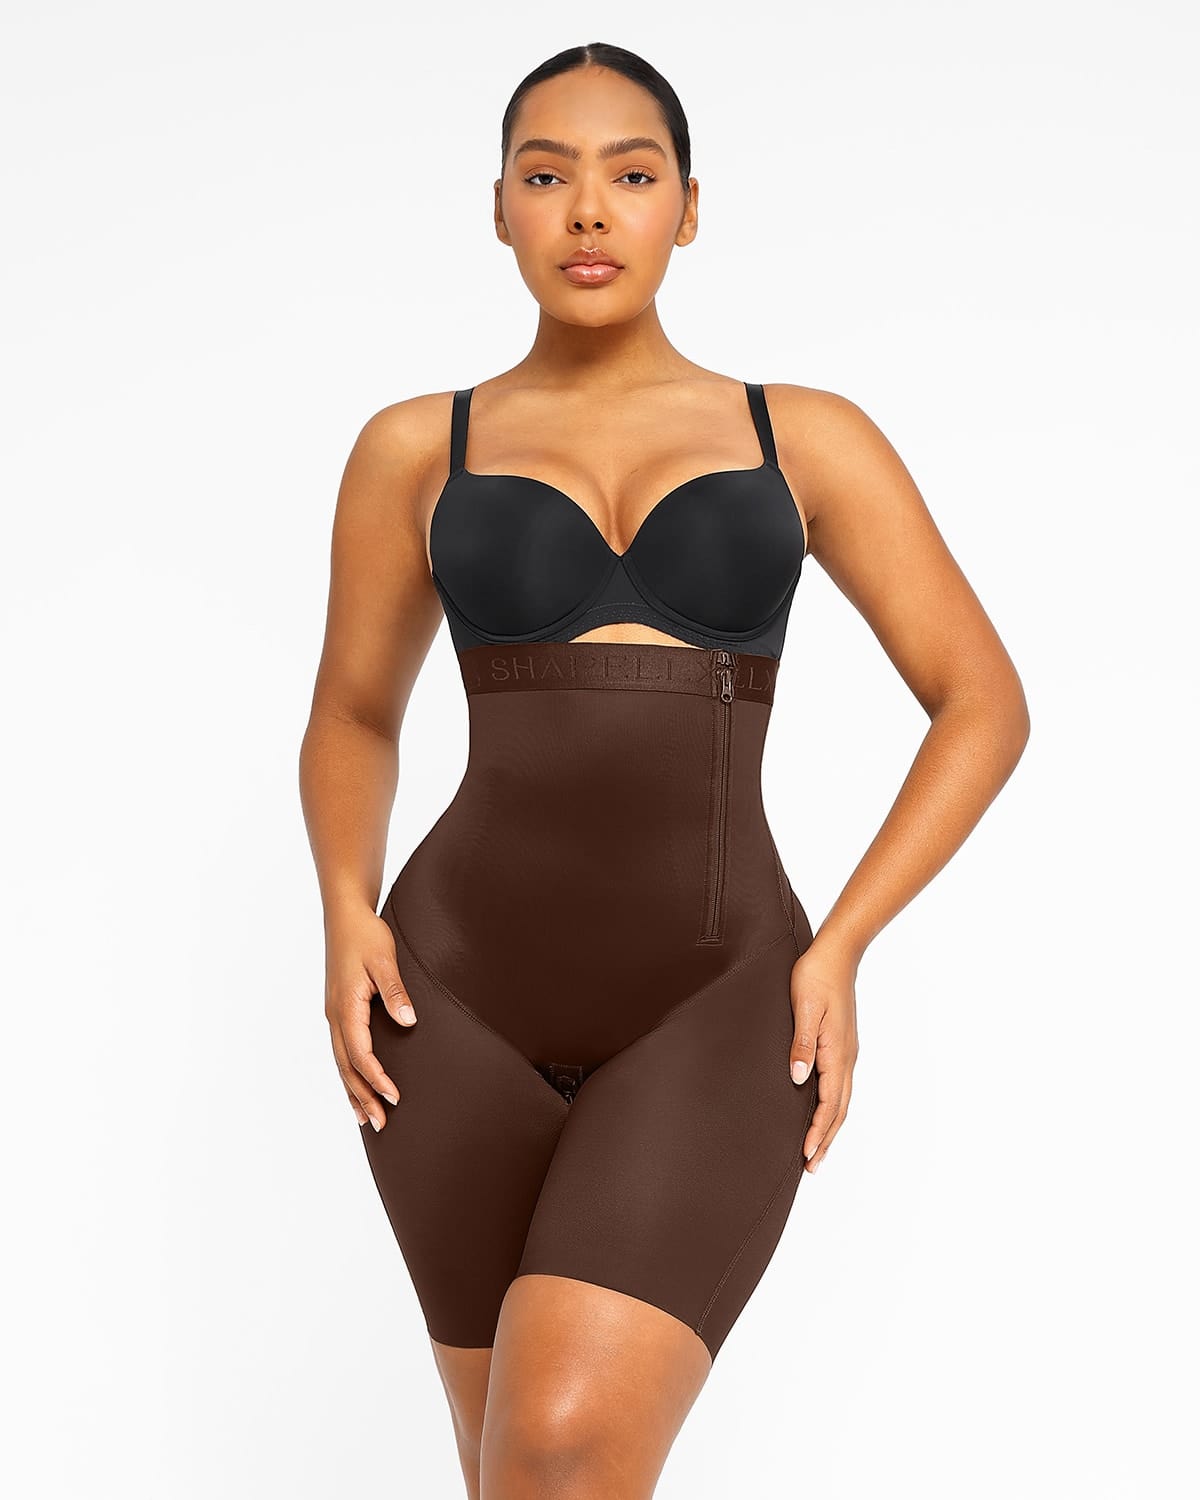 How to wear SHAPELLX shapewear to brighten the New Year - Mutmuthea's Blog